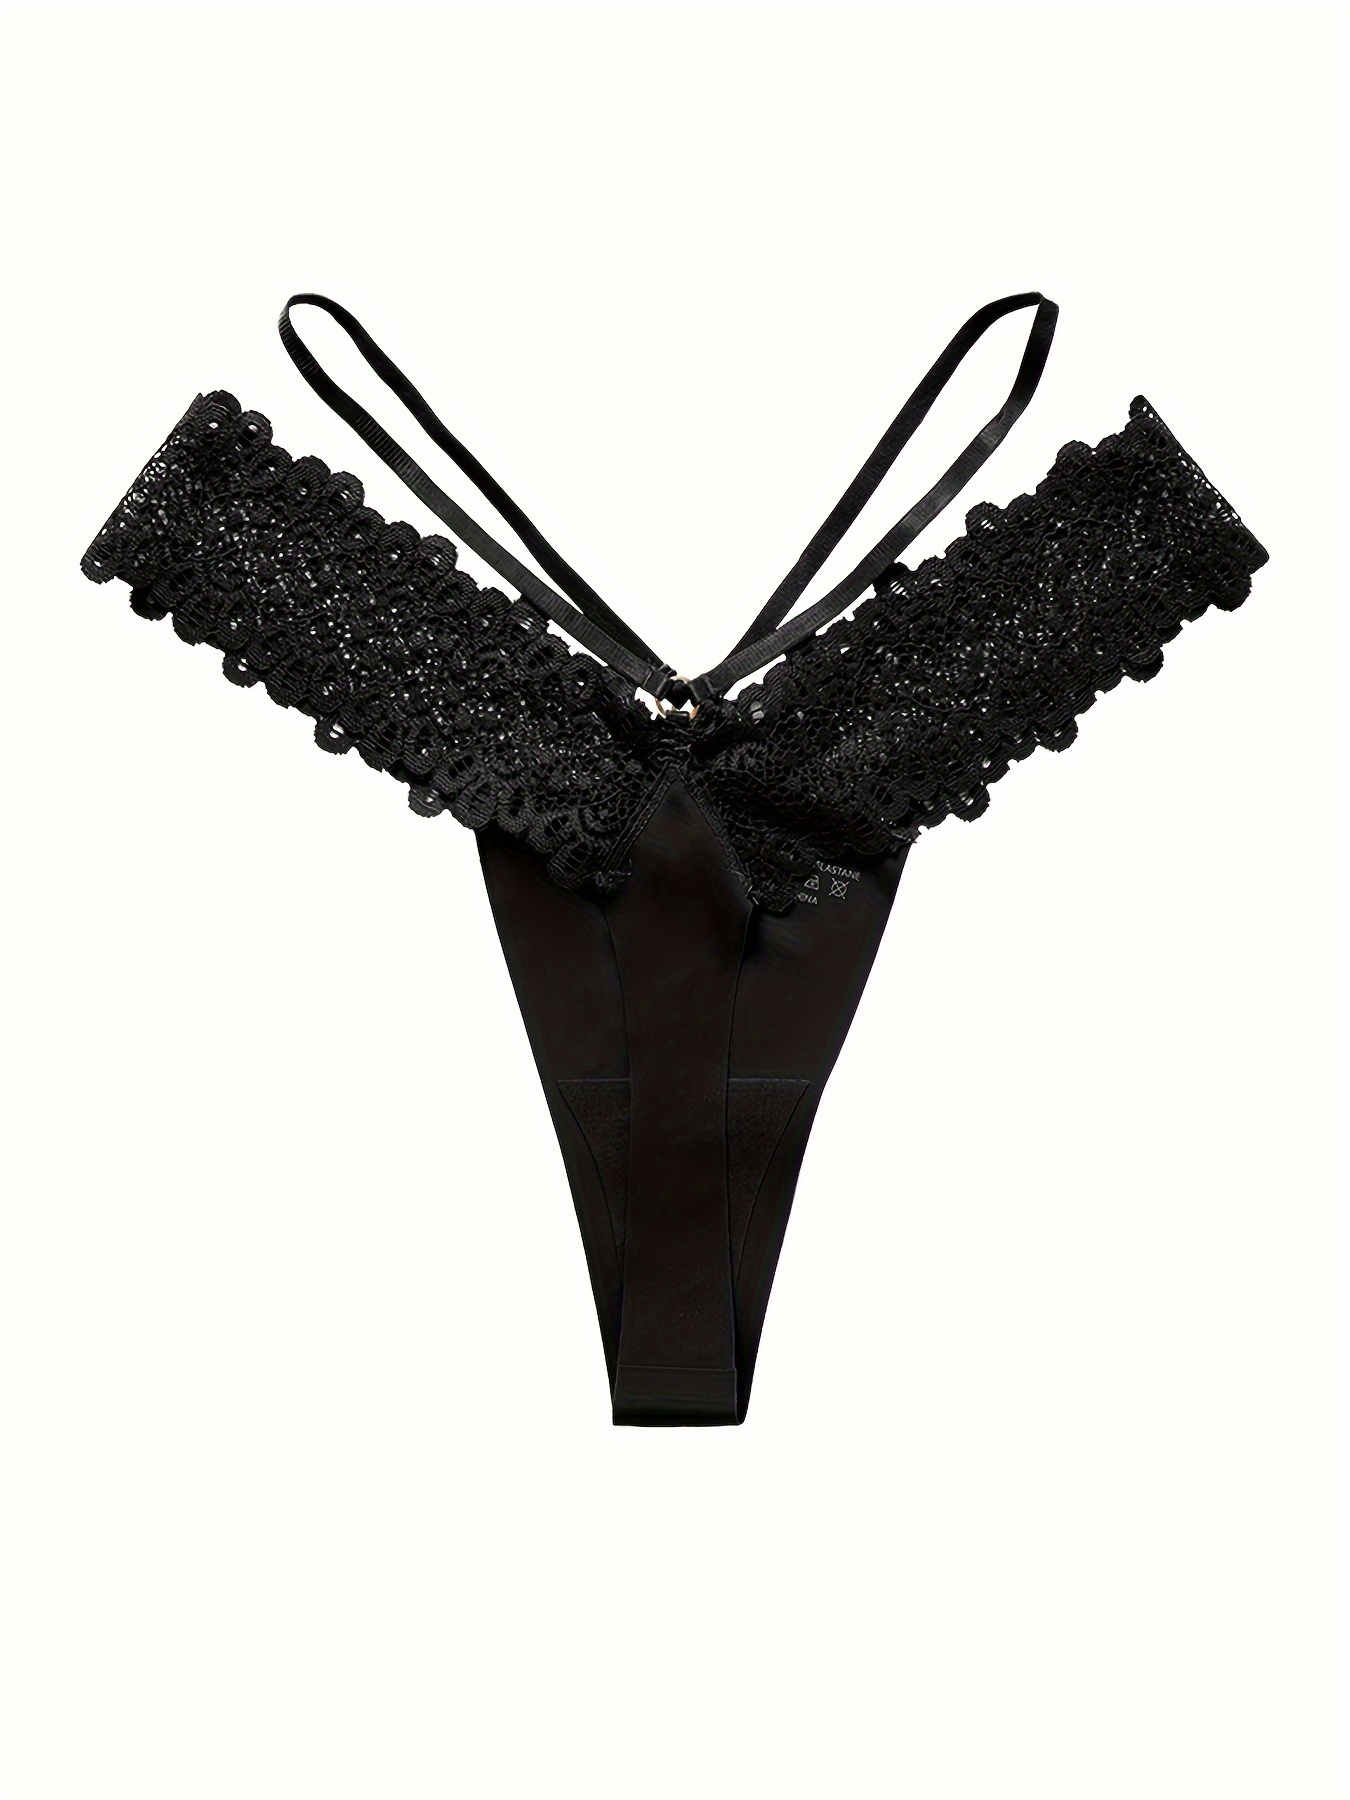 Black Plt Lace Strappy 2 Pack Tanga Thong